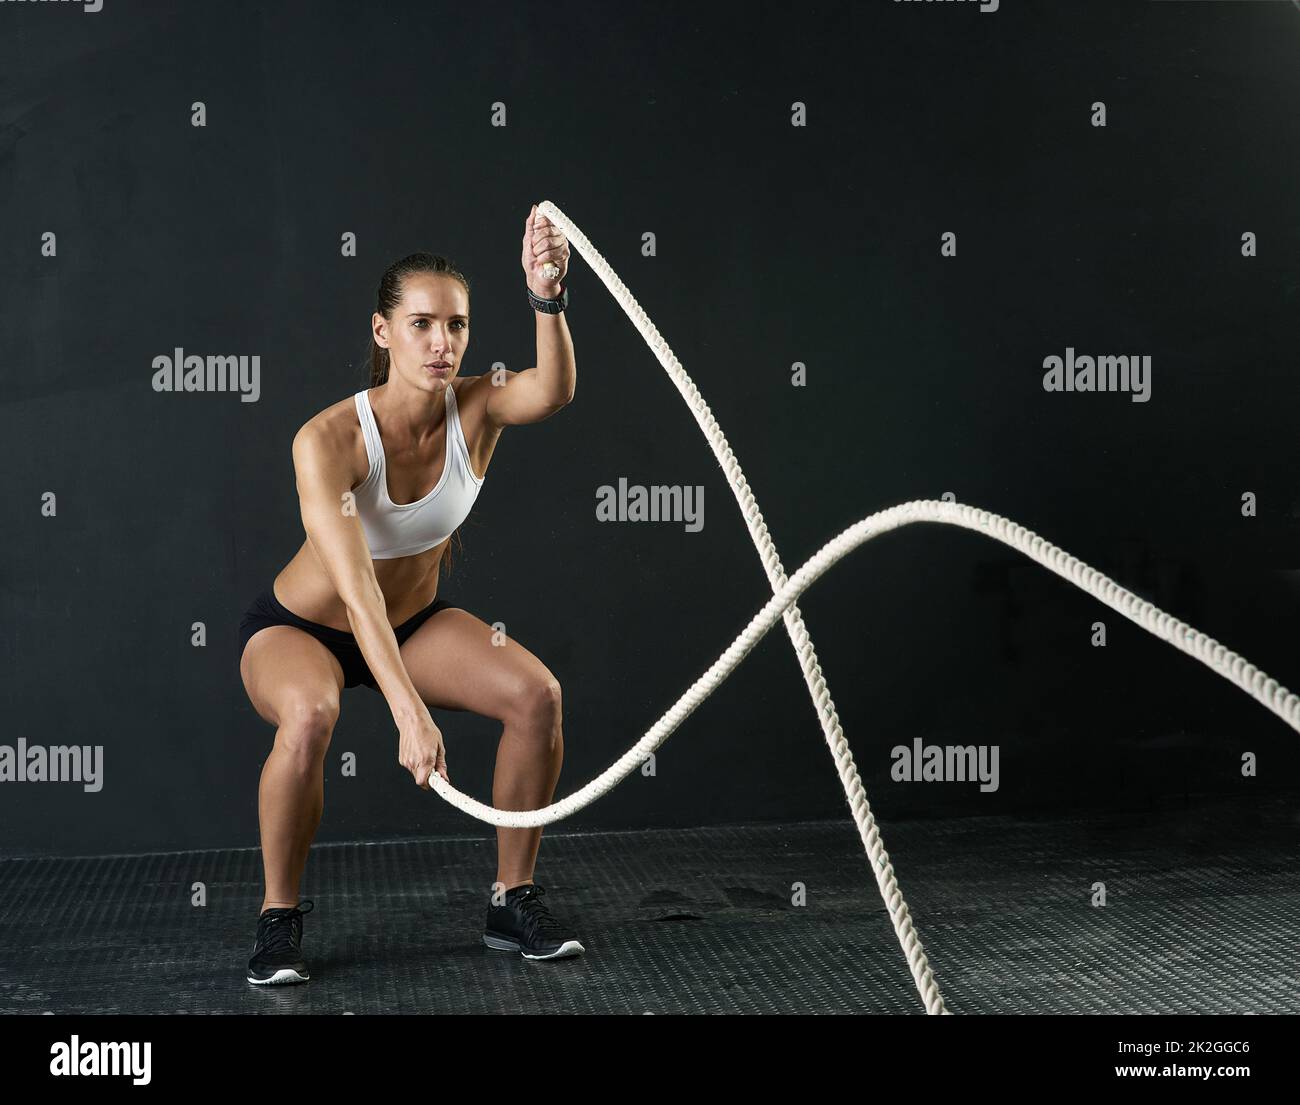 These ropes really are a battle. Studio shot of an attractive young woman working out with heavy ropes against a dark background. Stock Photo